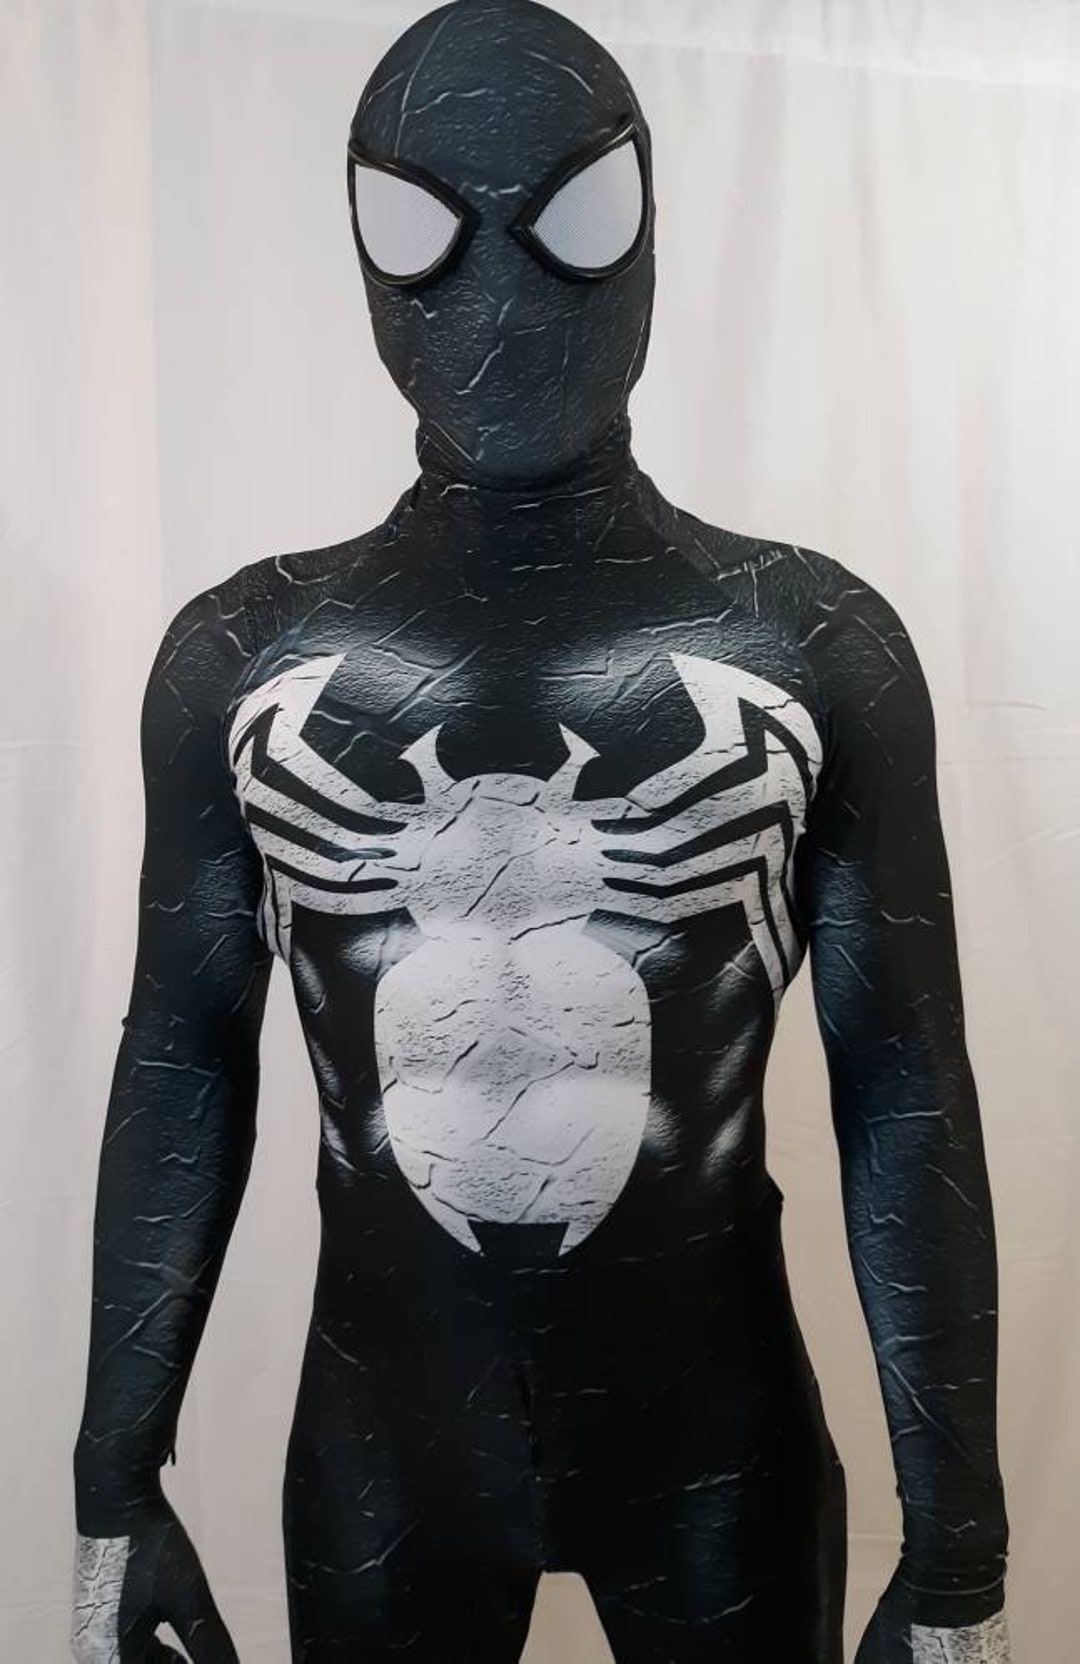 Venom 2: Let There Be Carnage She Venom Cosplay Costume Adult Kids